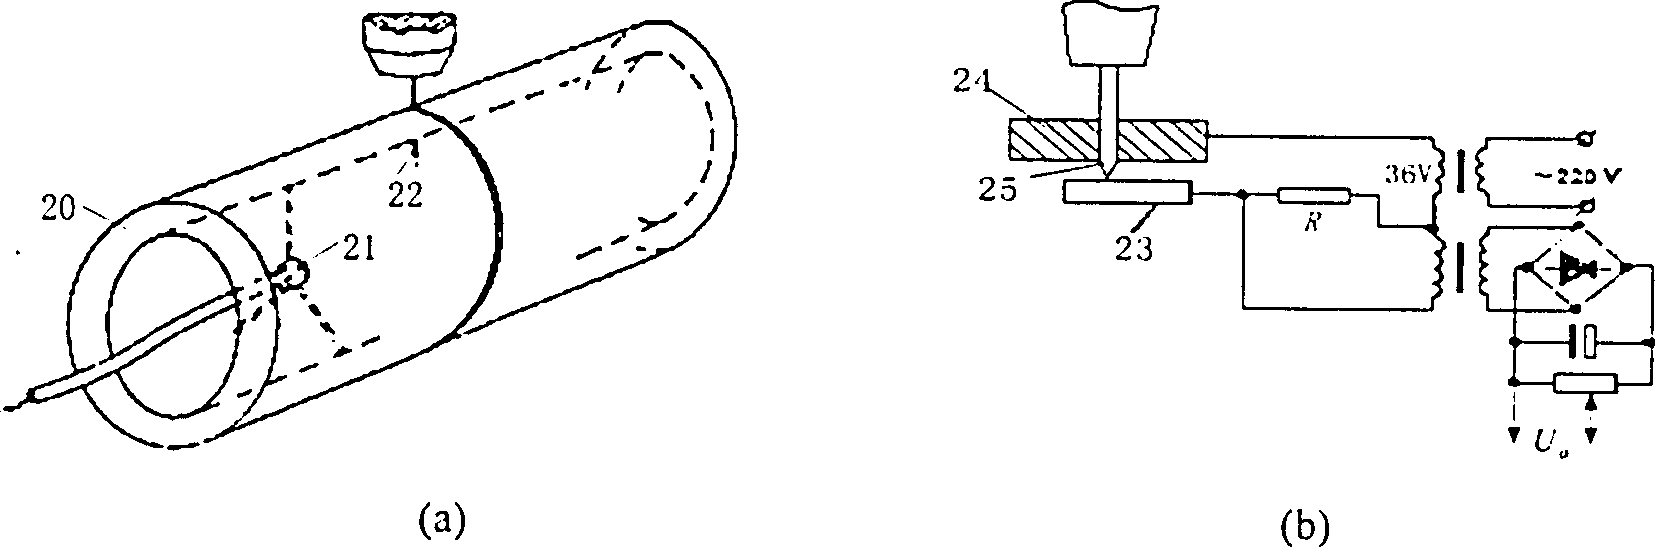 Arc method for measuring orifice size of molten bath for plasma welding and signal acquisition system